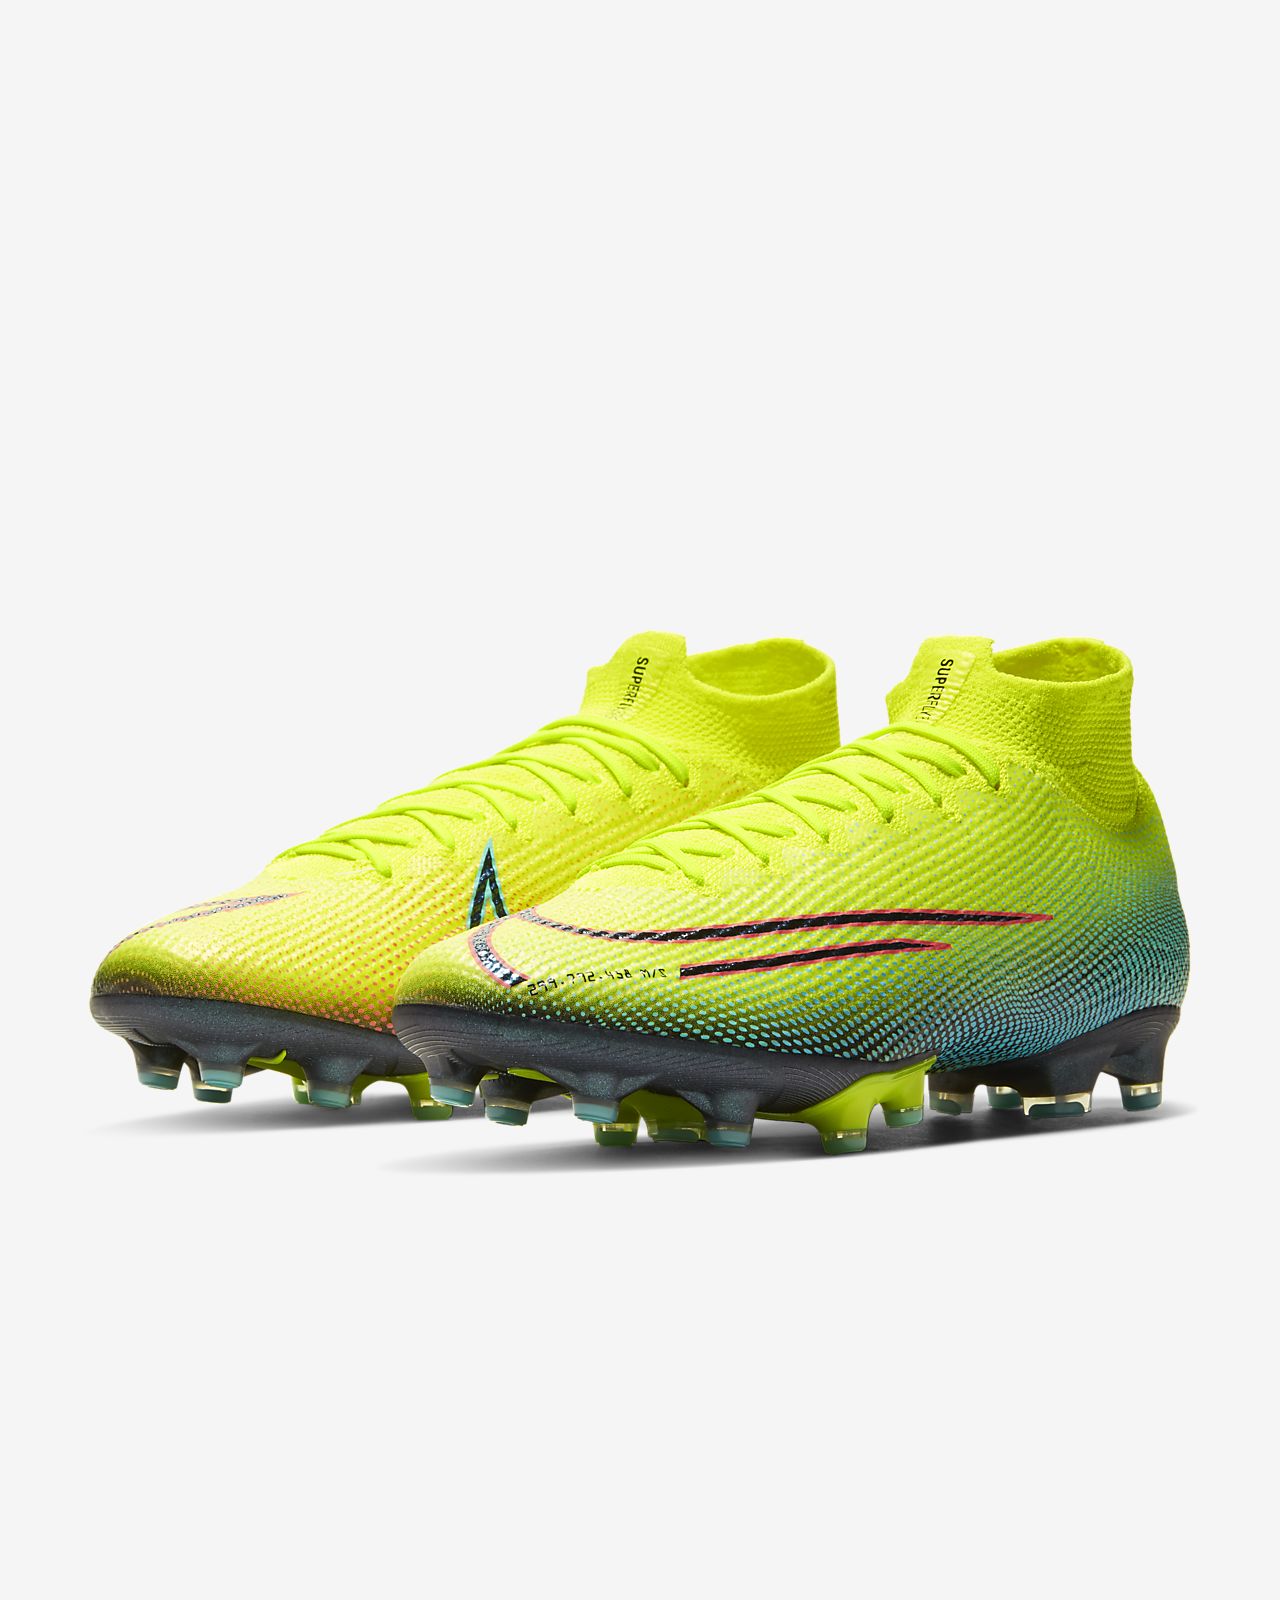 Nike Mercurial Superfly 7 Pro FG Firm Ground Soccer Cleat